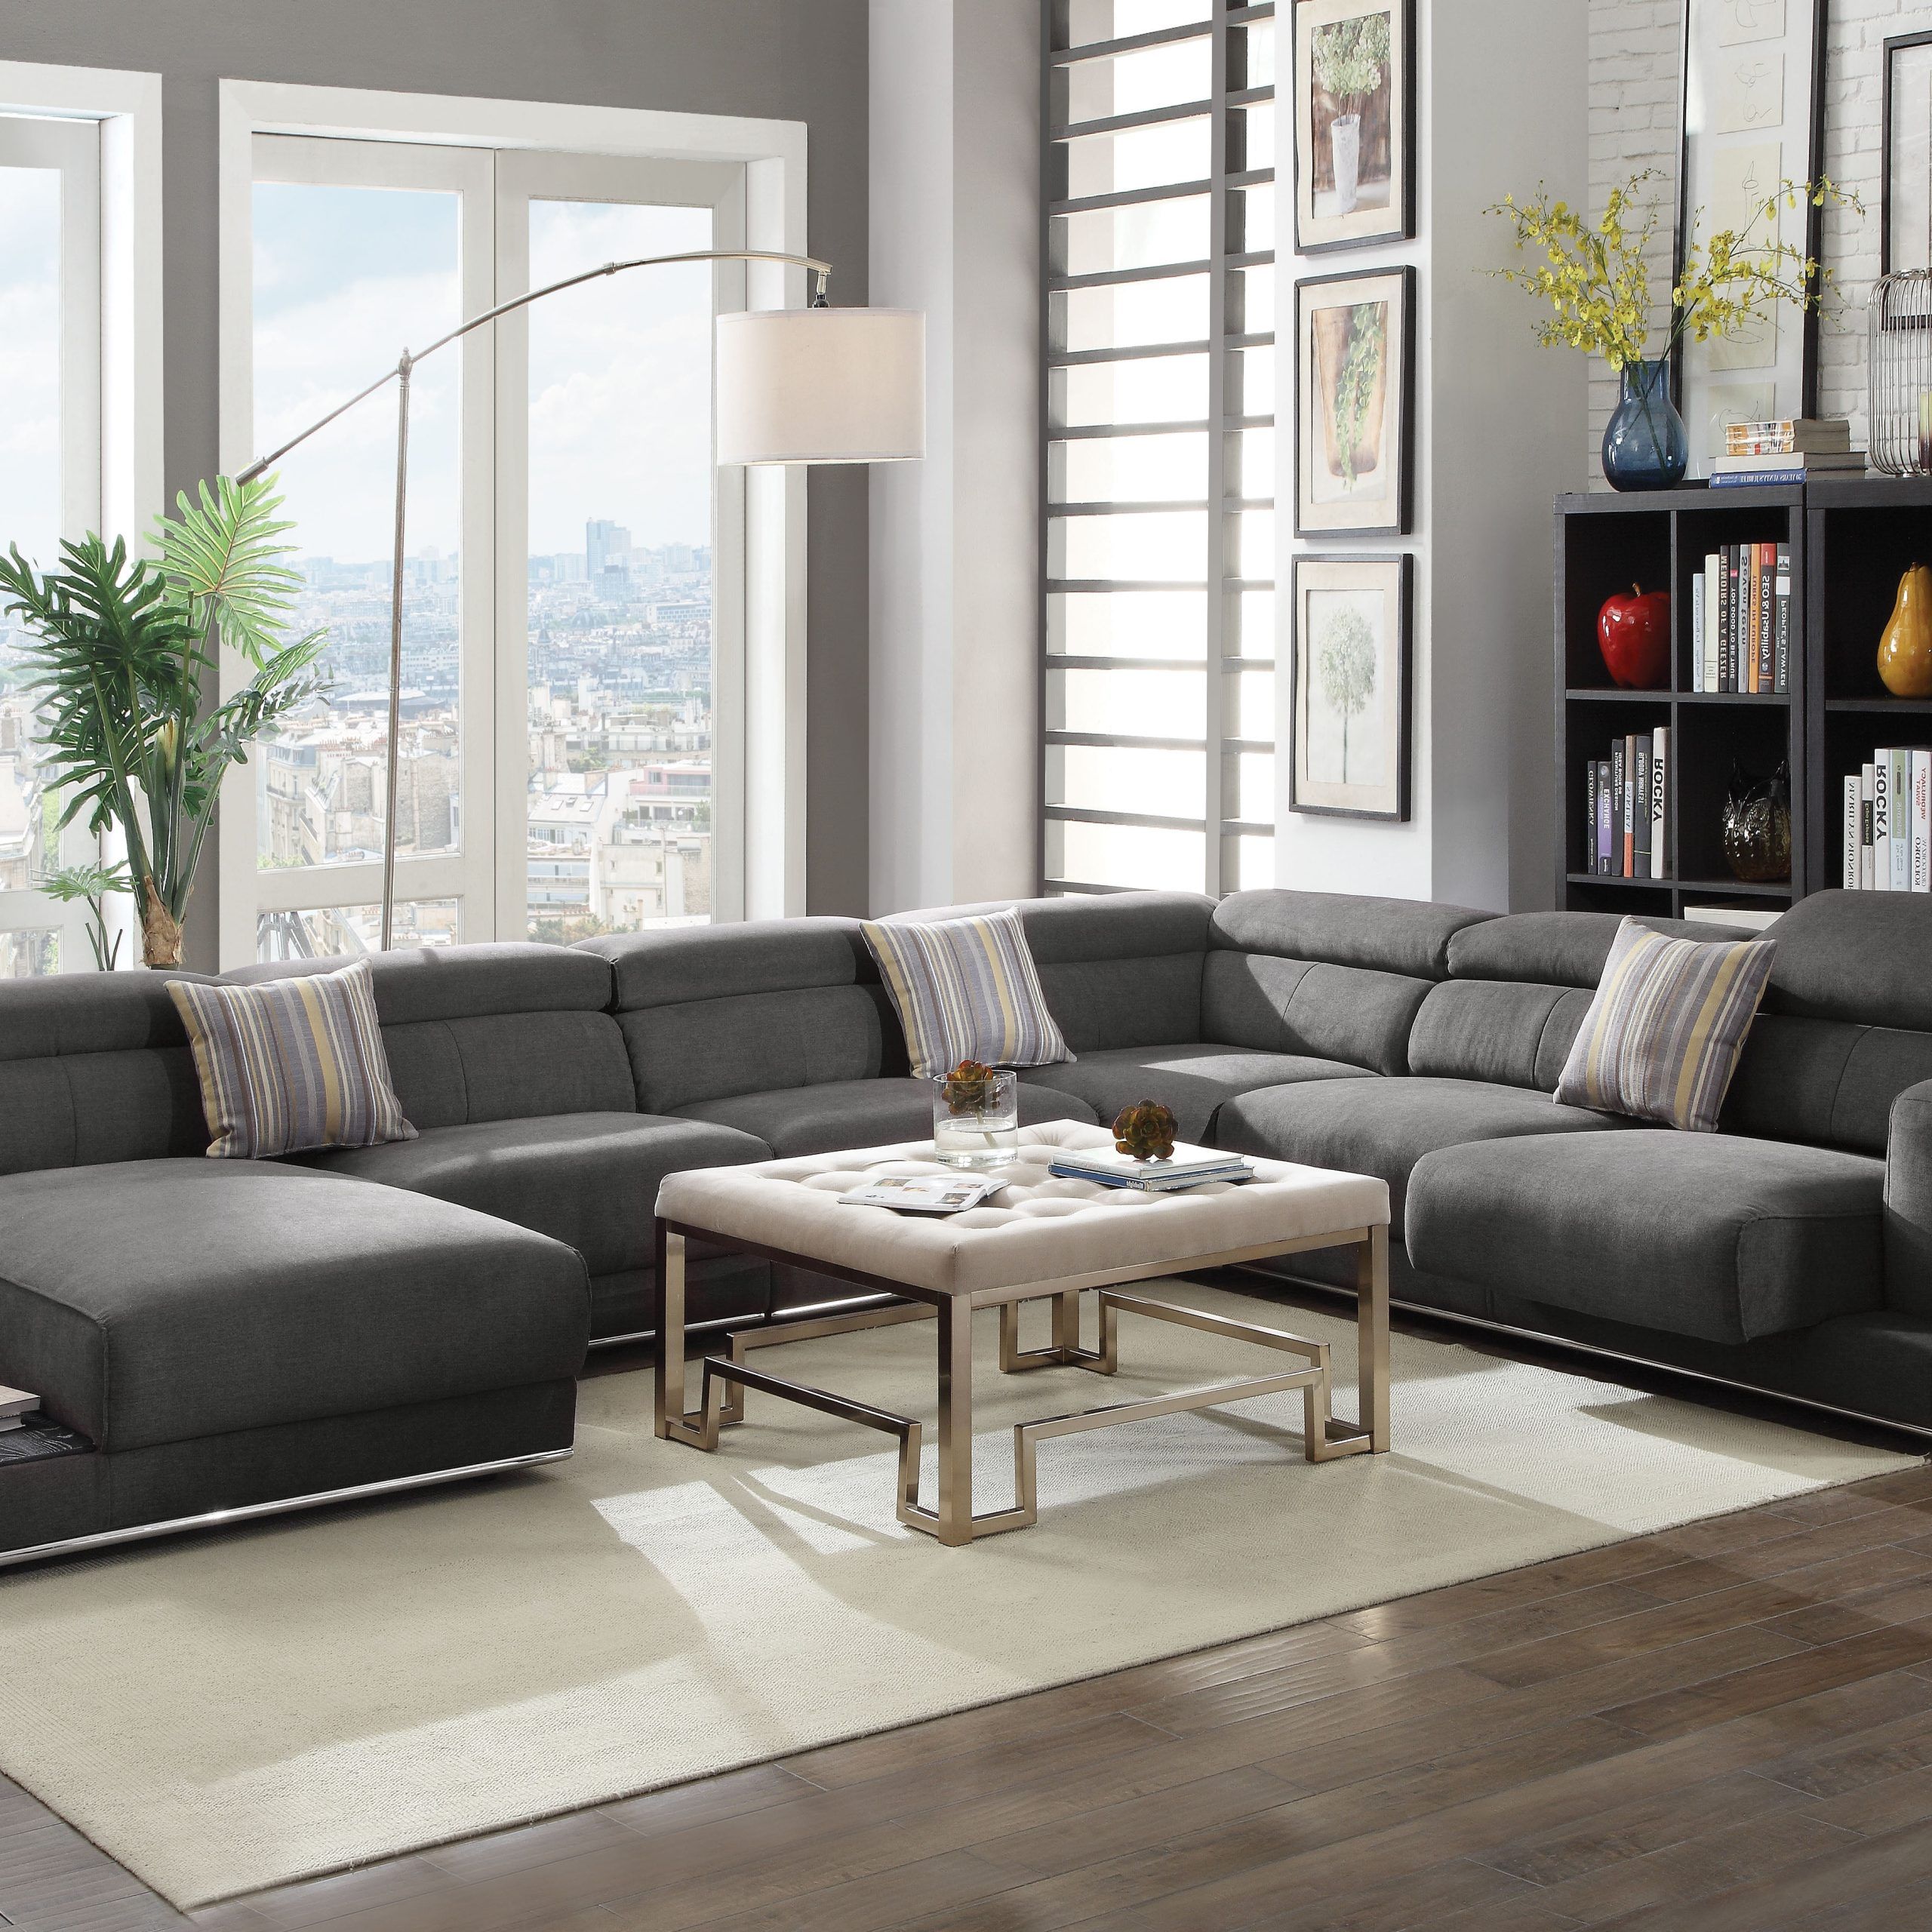 Acme Alwin Sectional Sofa In Dark Gray Fabric Upholstery – Walmart Pertaining To 2018 Sofas In Dark Gray (View 7 of 15)